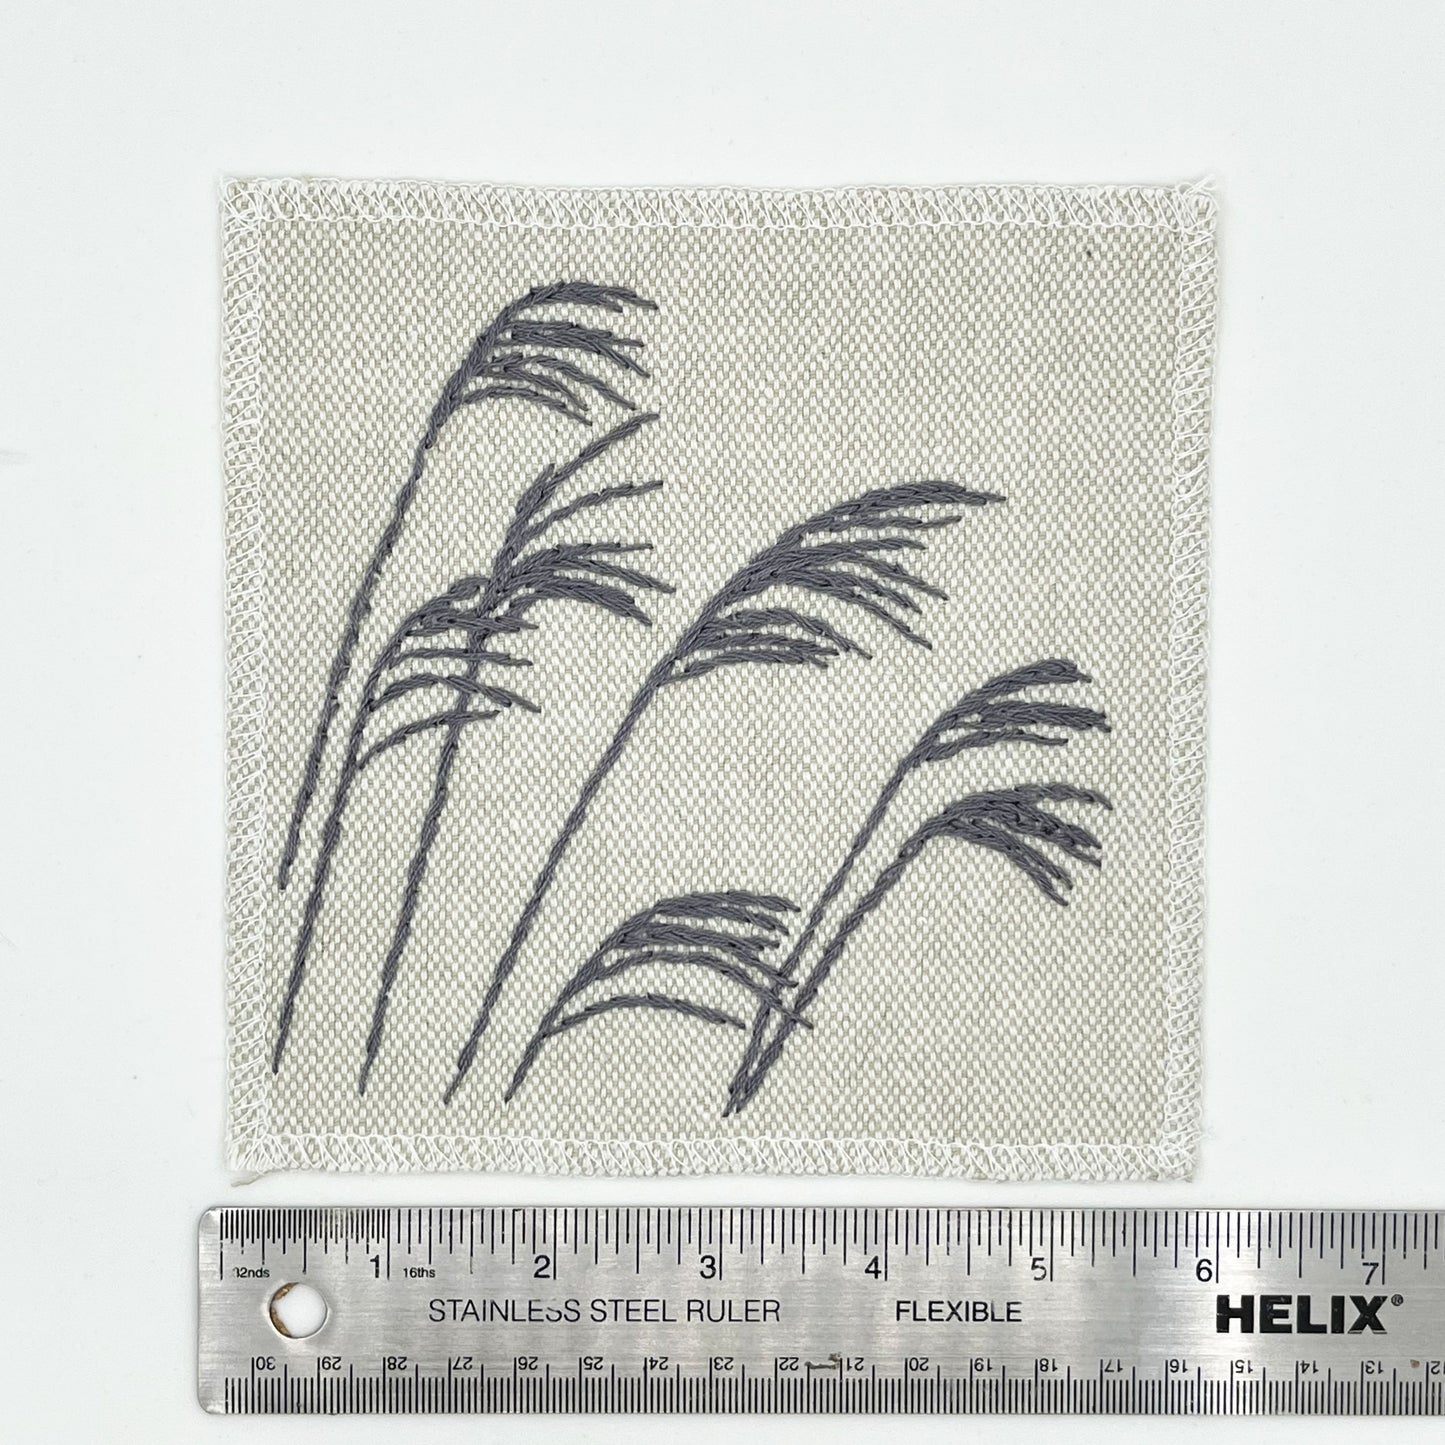 a cream colored square patch with stalks of wild grass stitched in grey thread with a stem stitch, placed next to a metal ruler to show a width of 6 inches, on a white background